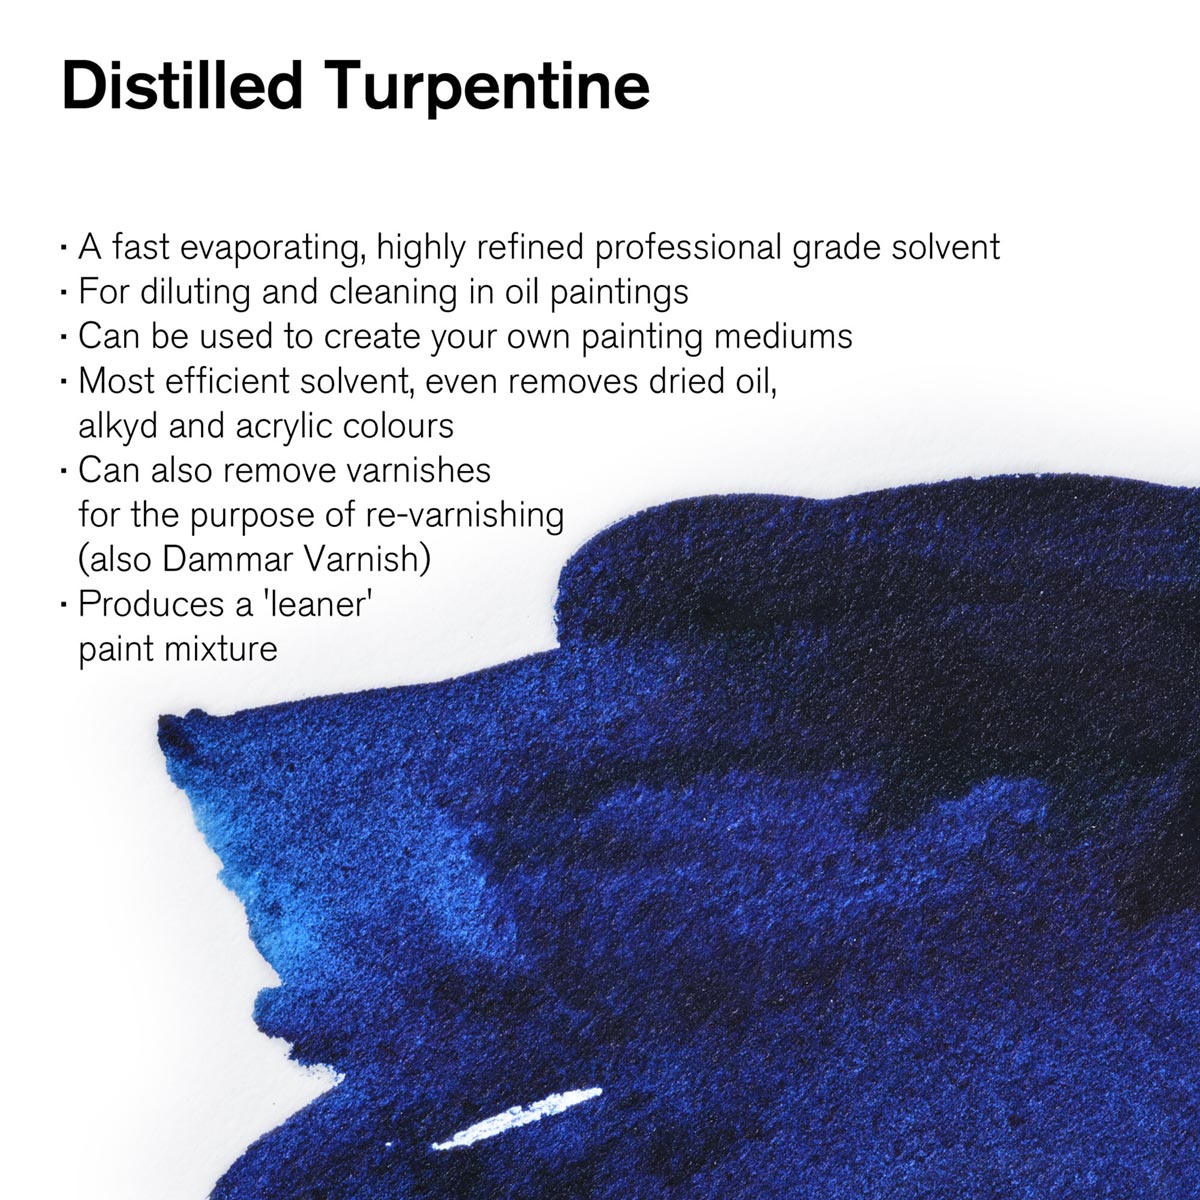 Winsor and Newton - English Distilled Turpentine - 75ml -